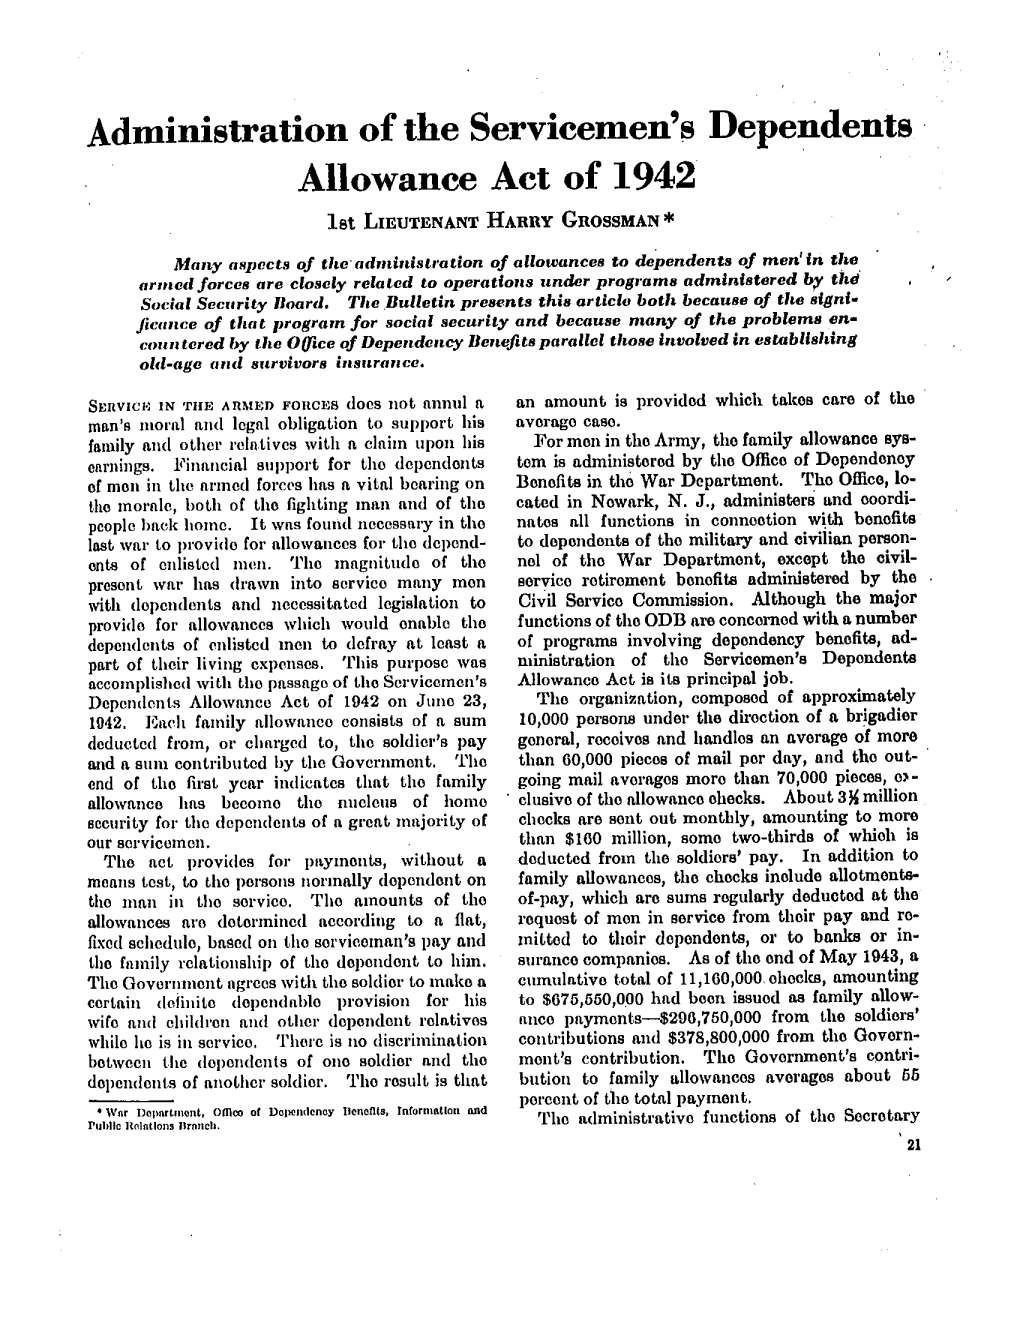 Administration of the Servicemen's Dependents Allowance Act of 1942